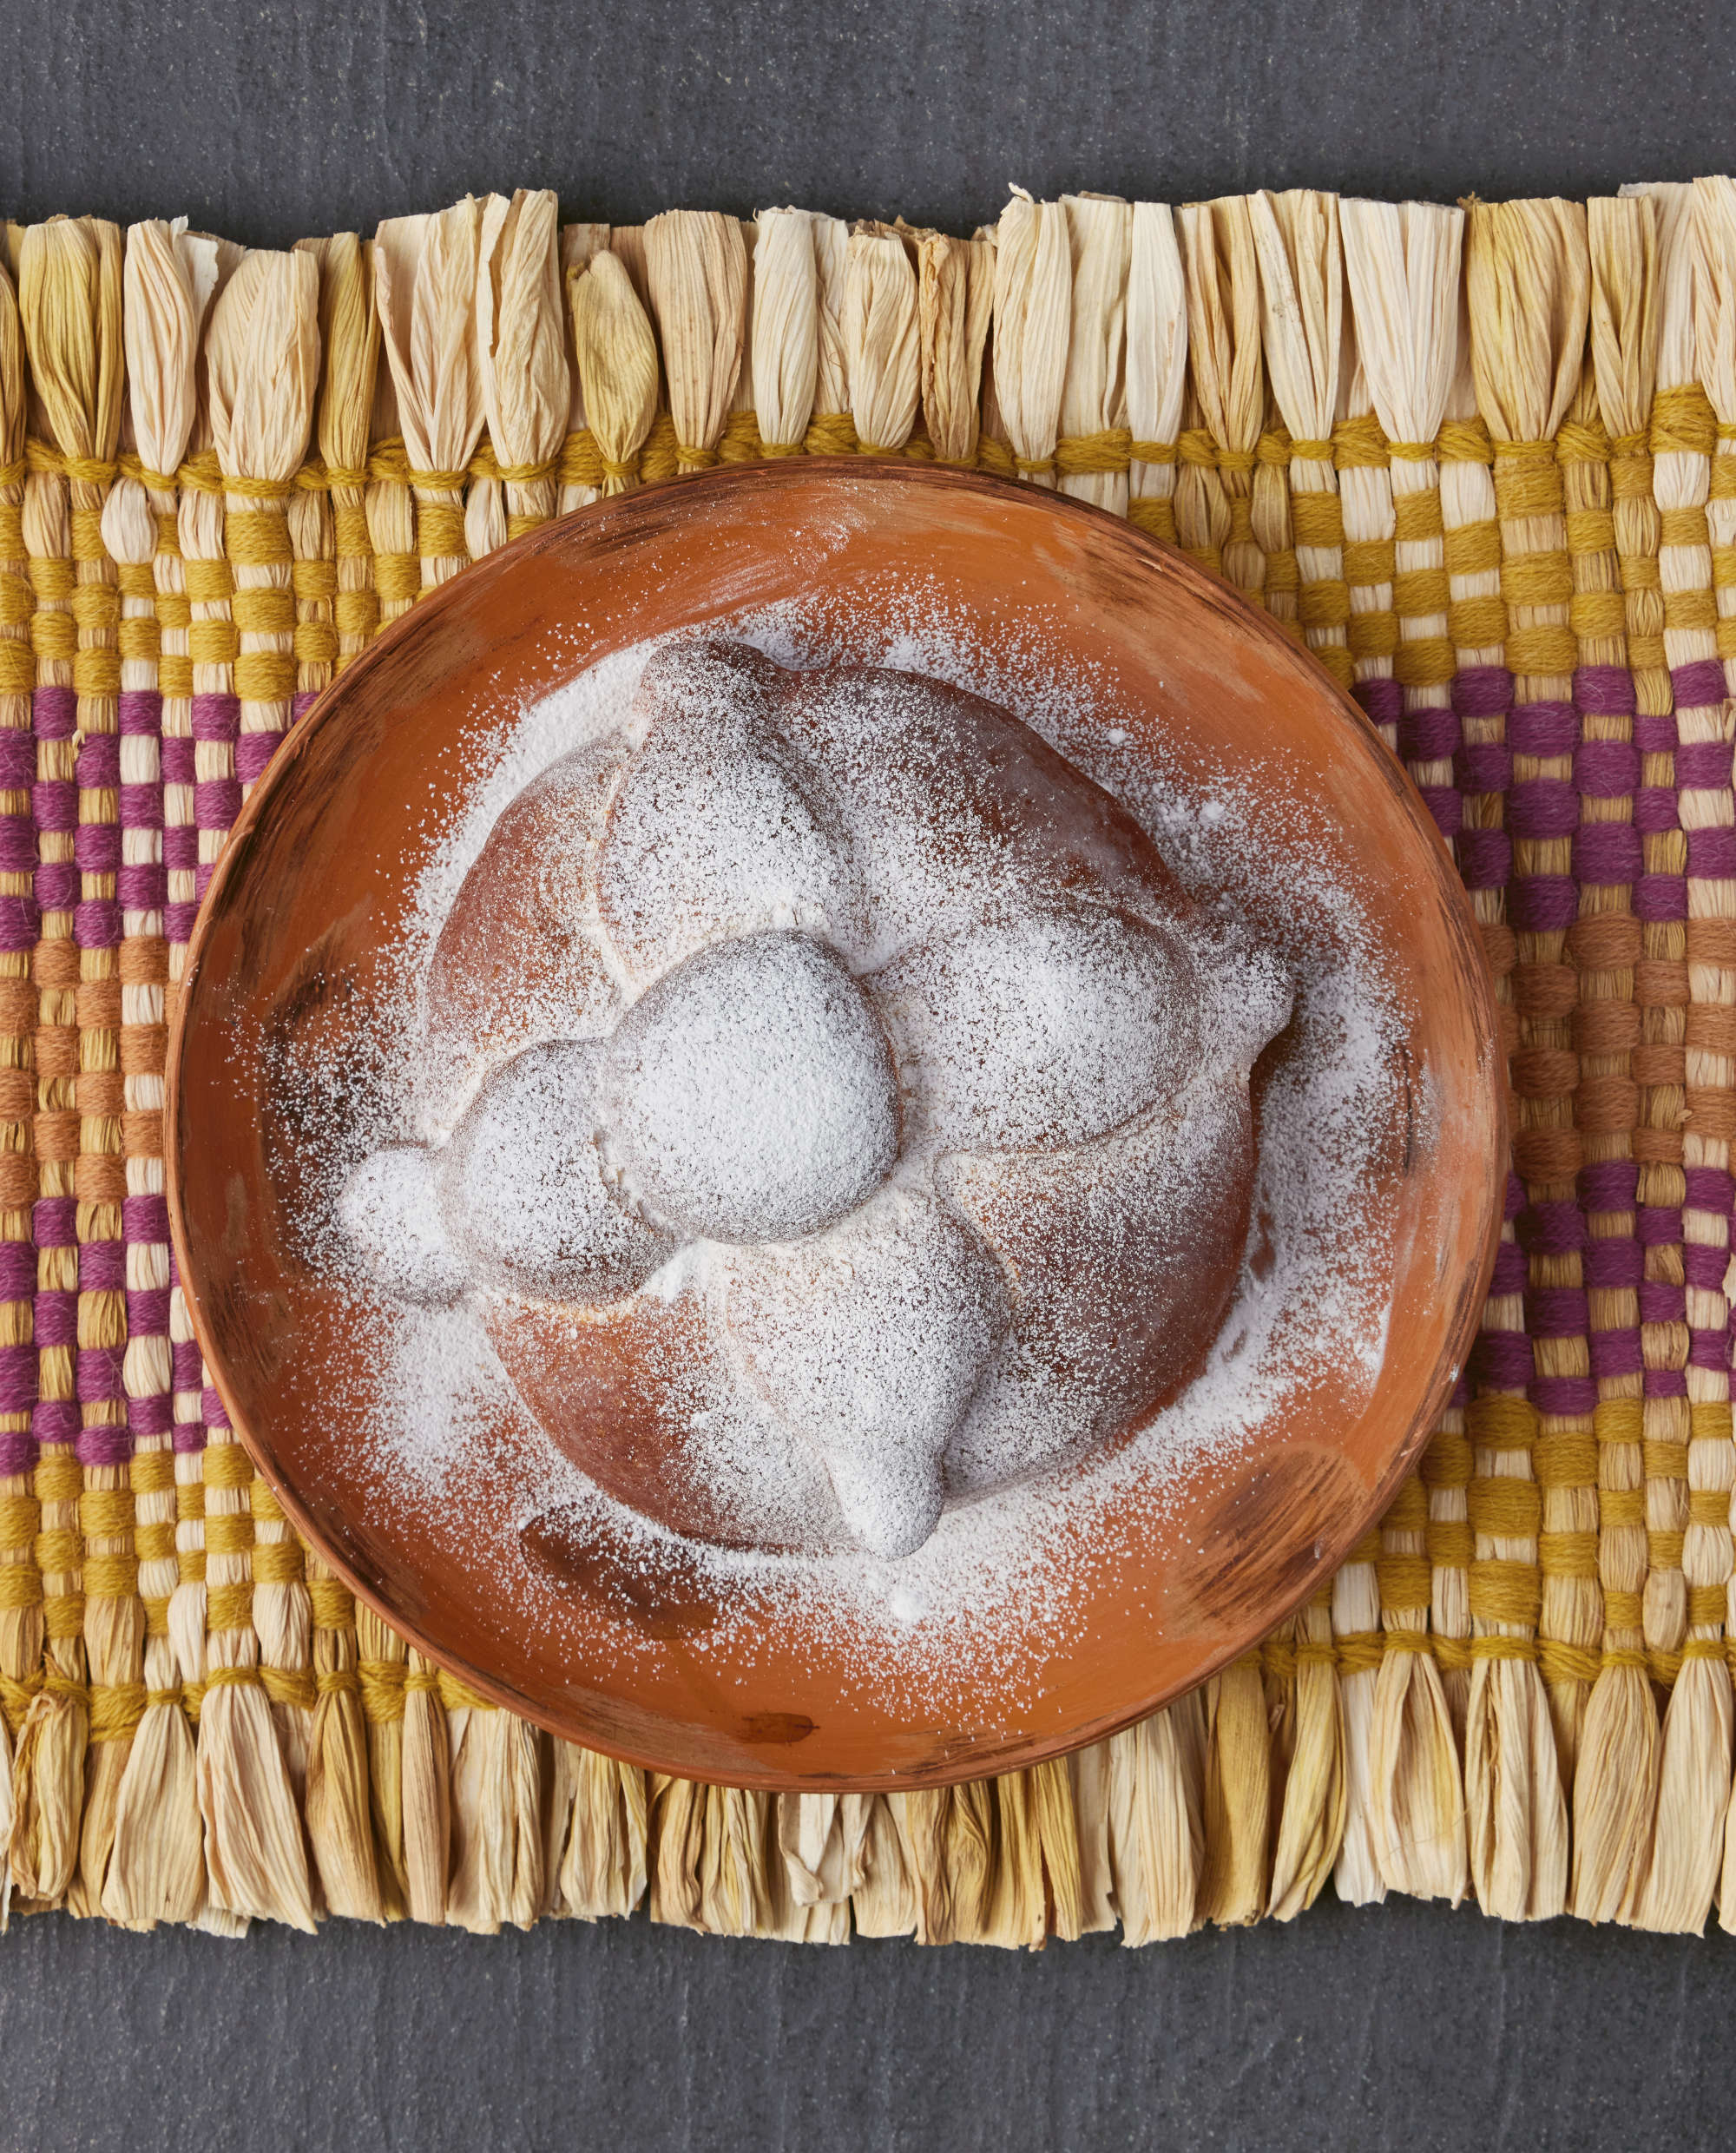 The sweet bread with a ghoulish story in the Latin American Cookbook